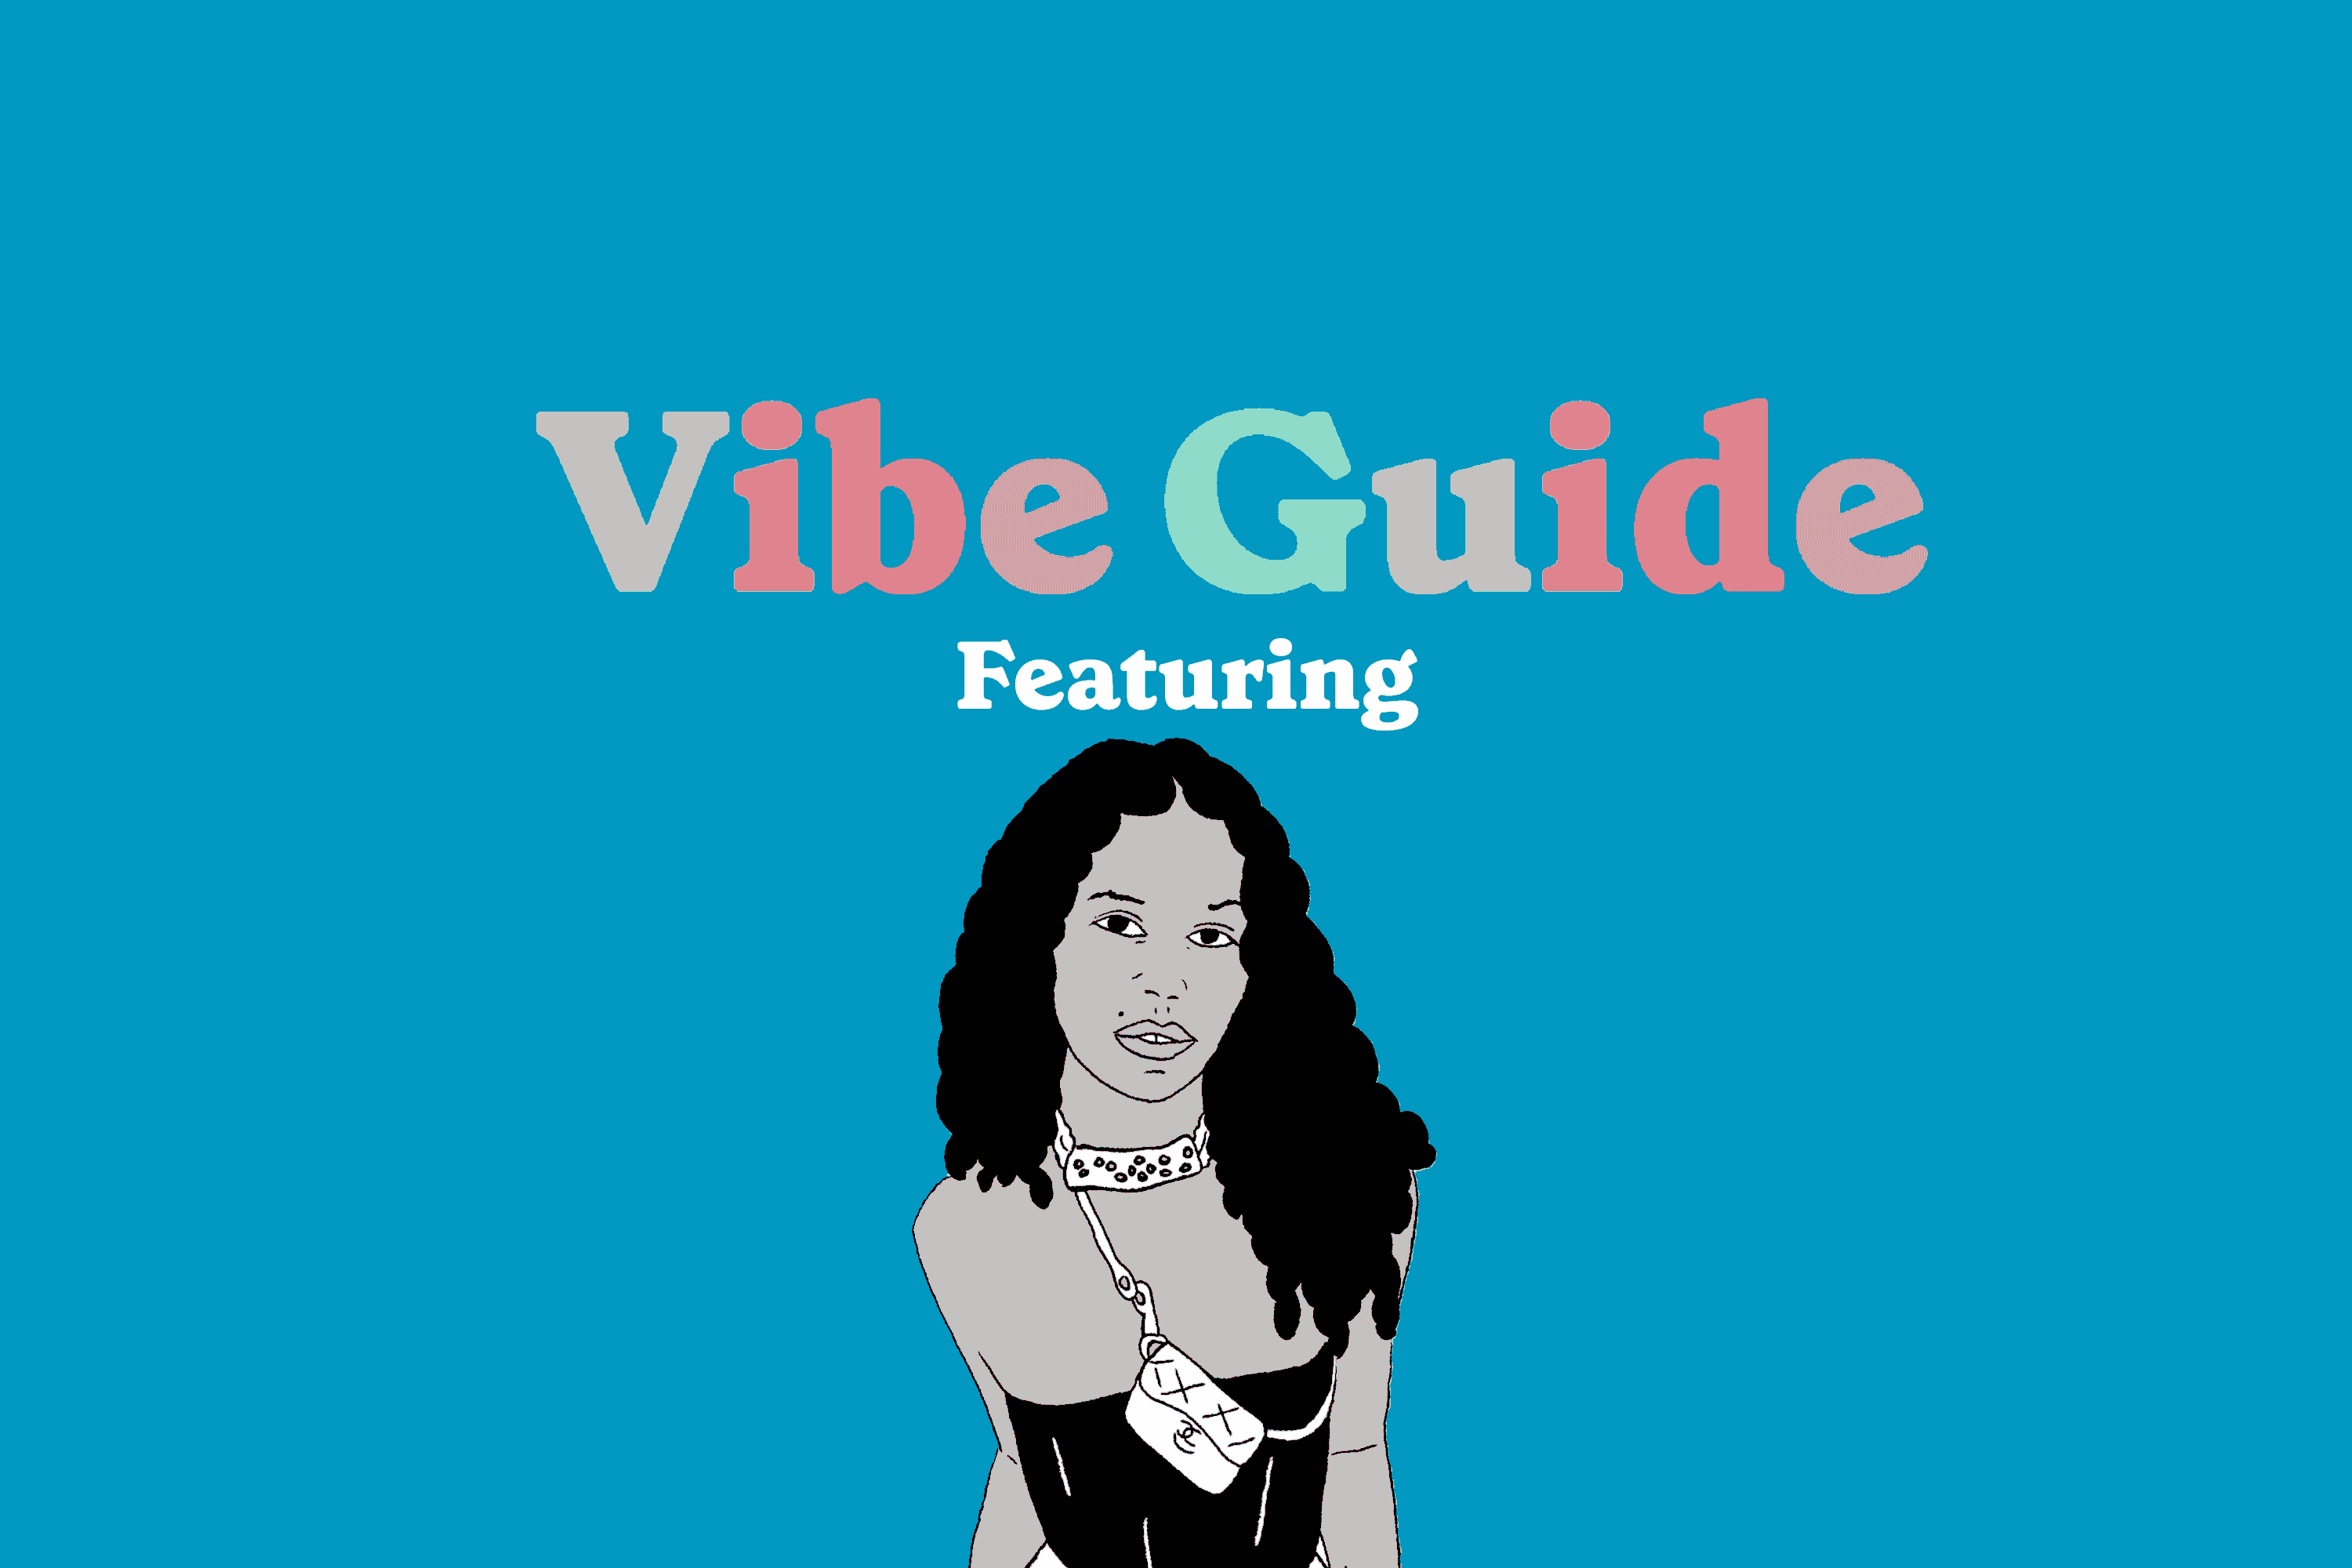 Vibe Guide featuring Sami Miró. 